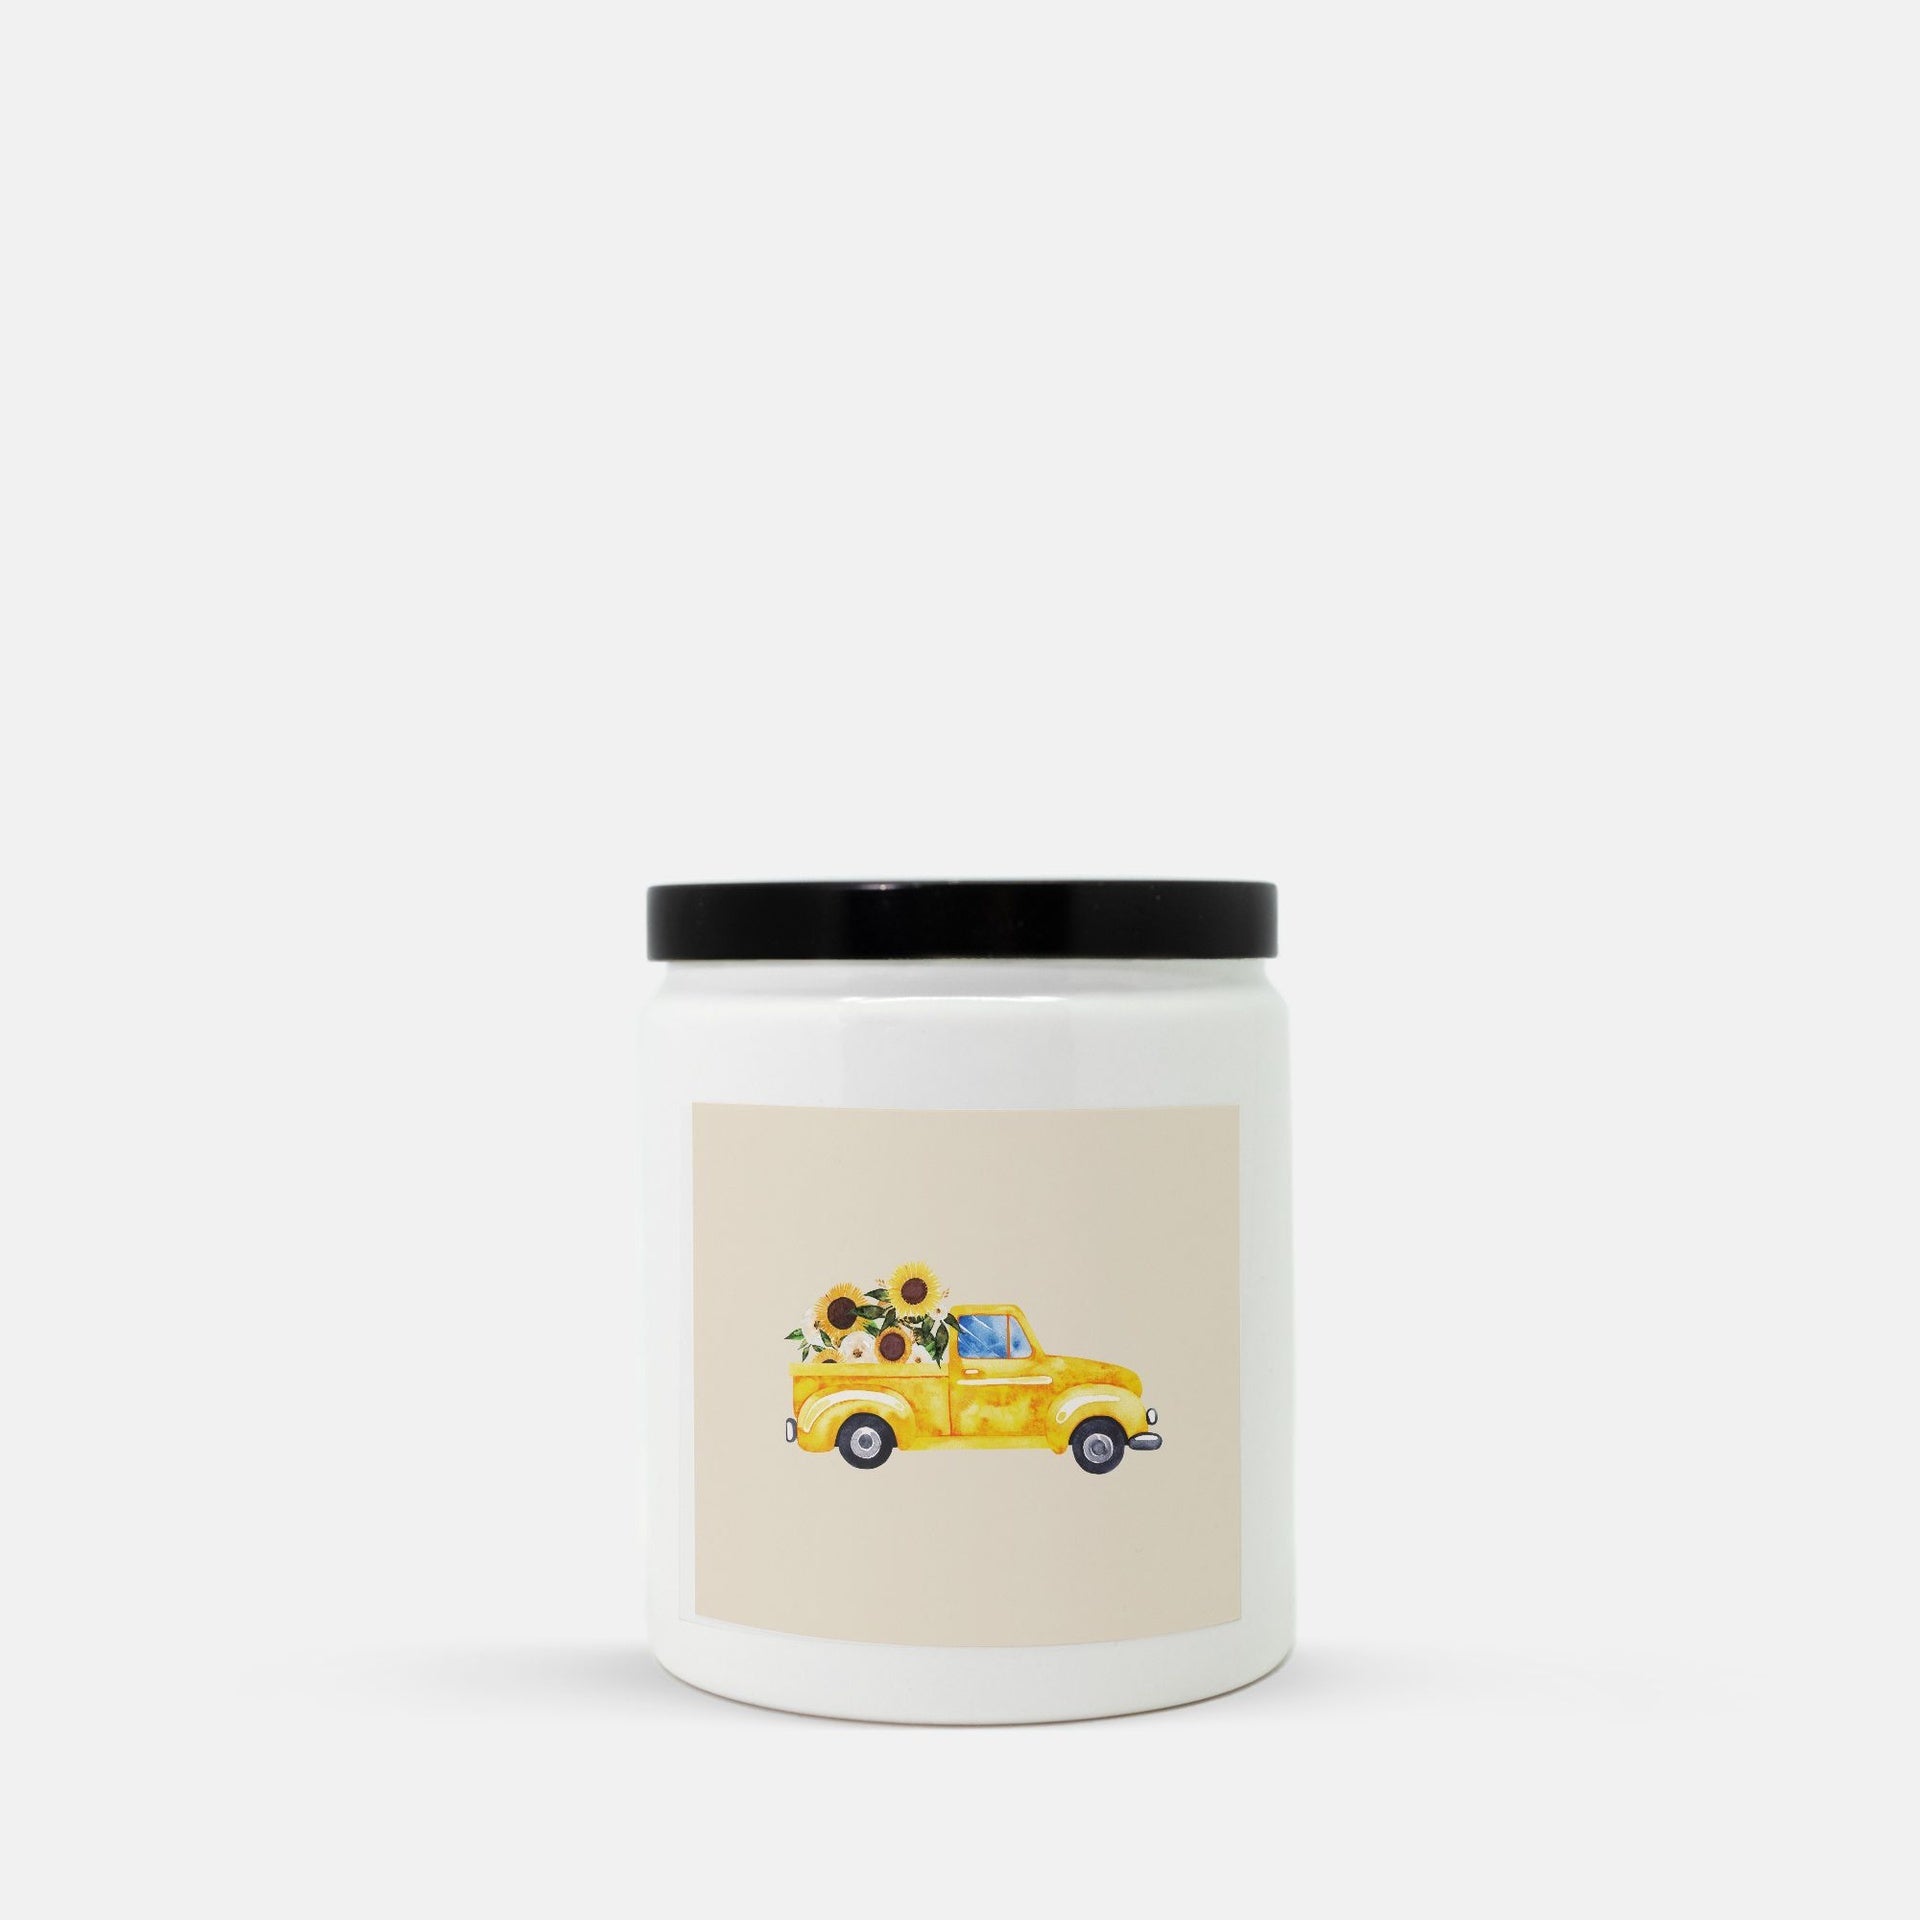 Lifestyle Details - Yellow Rustic Truck Ceramic Candle w Black Lid - Macintosh